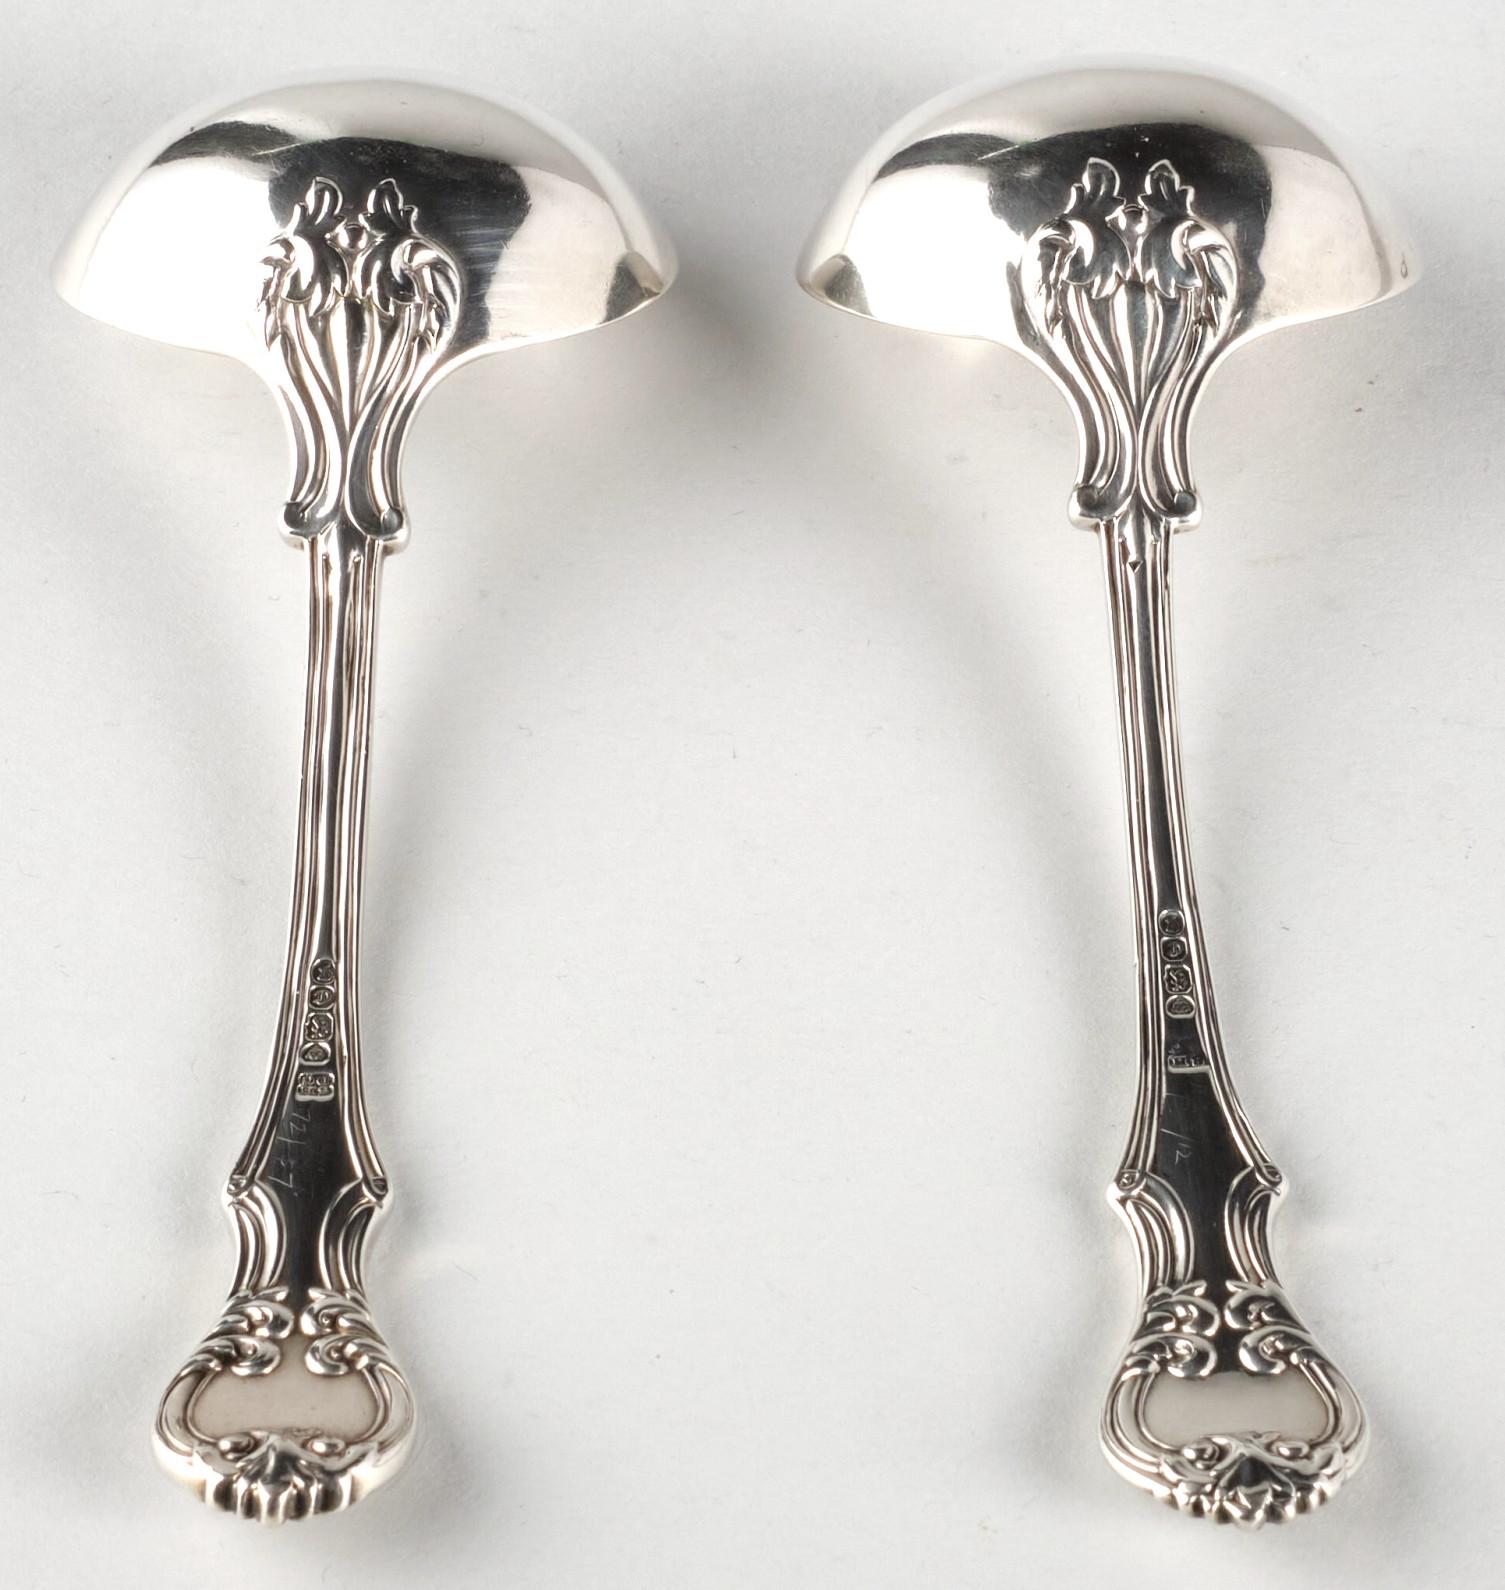 A Very Fine Pair of 19th Century Sterling Silver Sauce Ladles, Hallmarked 1840 In Good Condition For Sale In Ottawa, Ontario